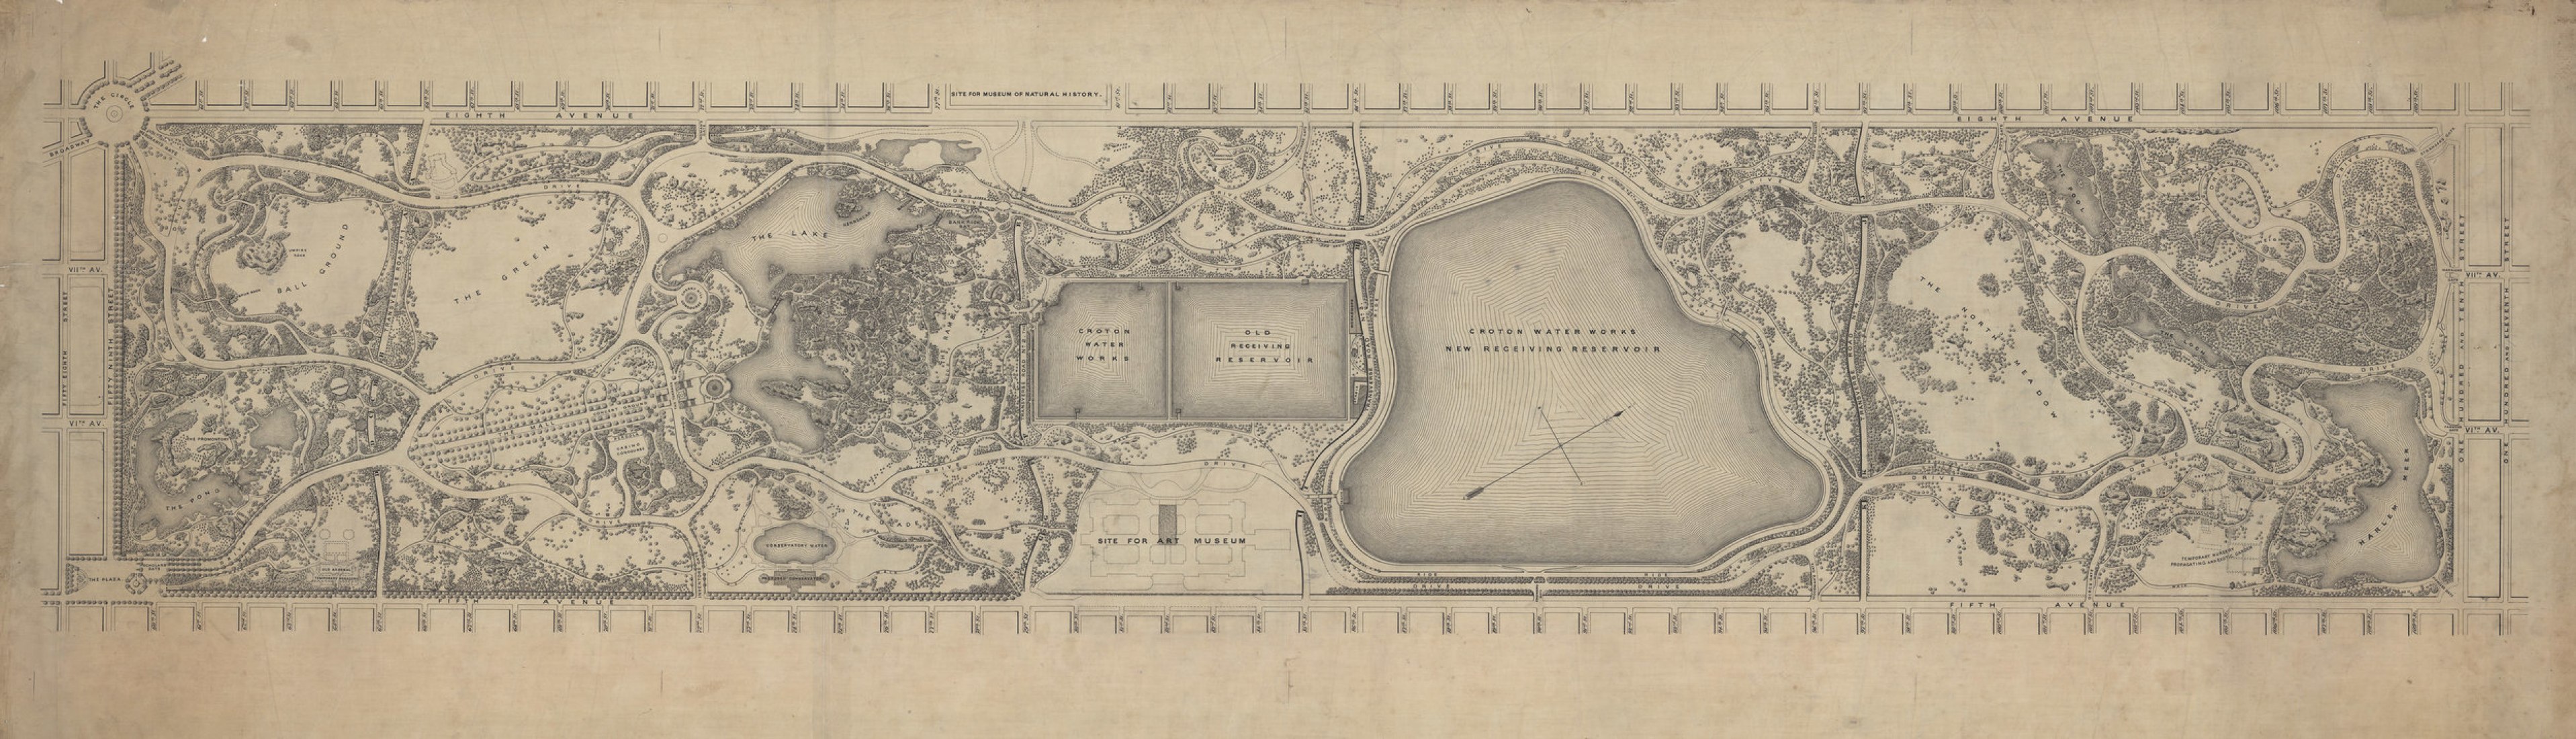 Plan of Central Park, c. 1875. Black ink on linen, 24 x 74 inches.  This plan shows work both planned and completed as of the mid-1870s. It includes Drives, Rides, Walks, bridges, named gates, and major structures as well as several buildings that were being planned at the time but were never completed.